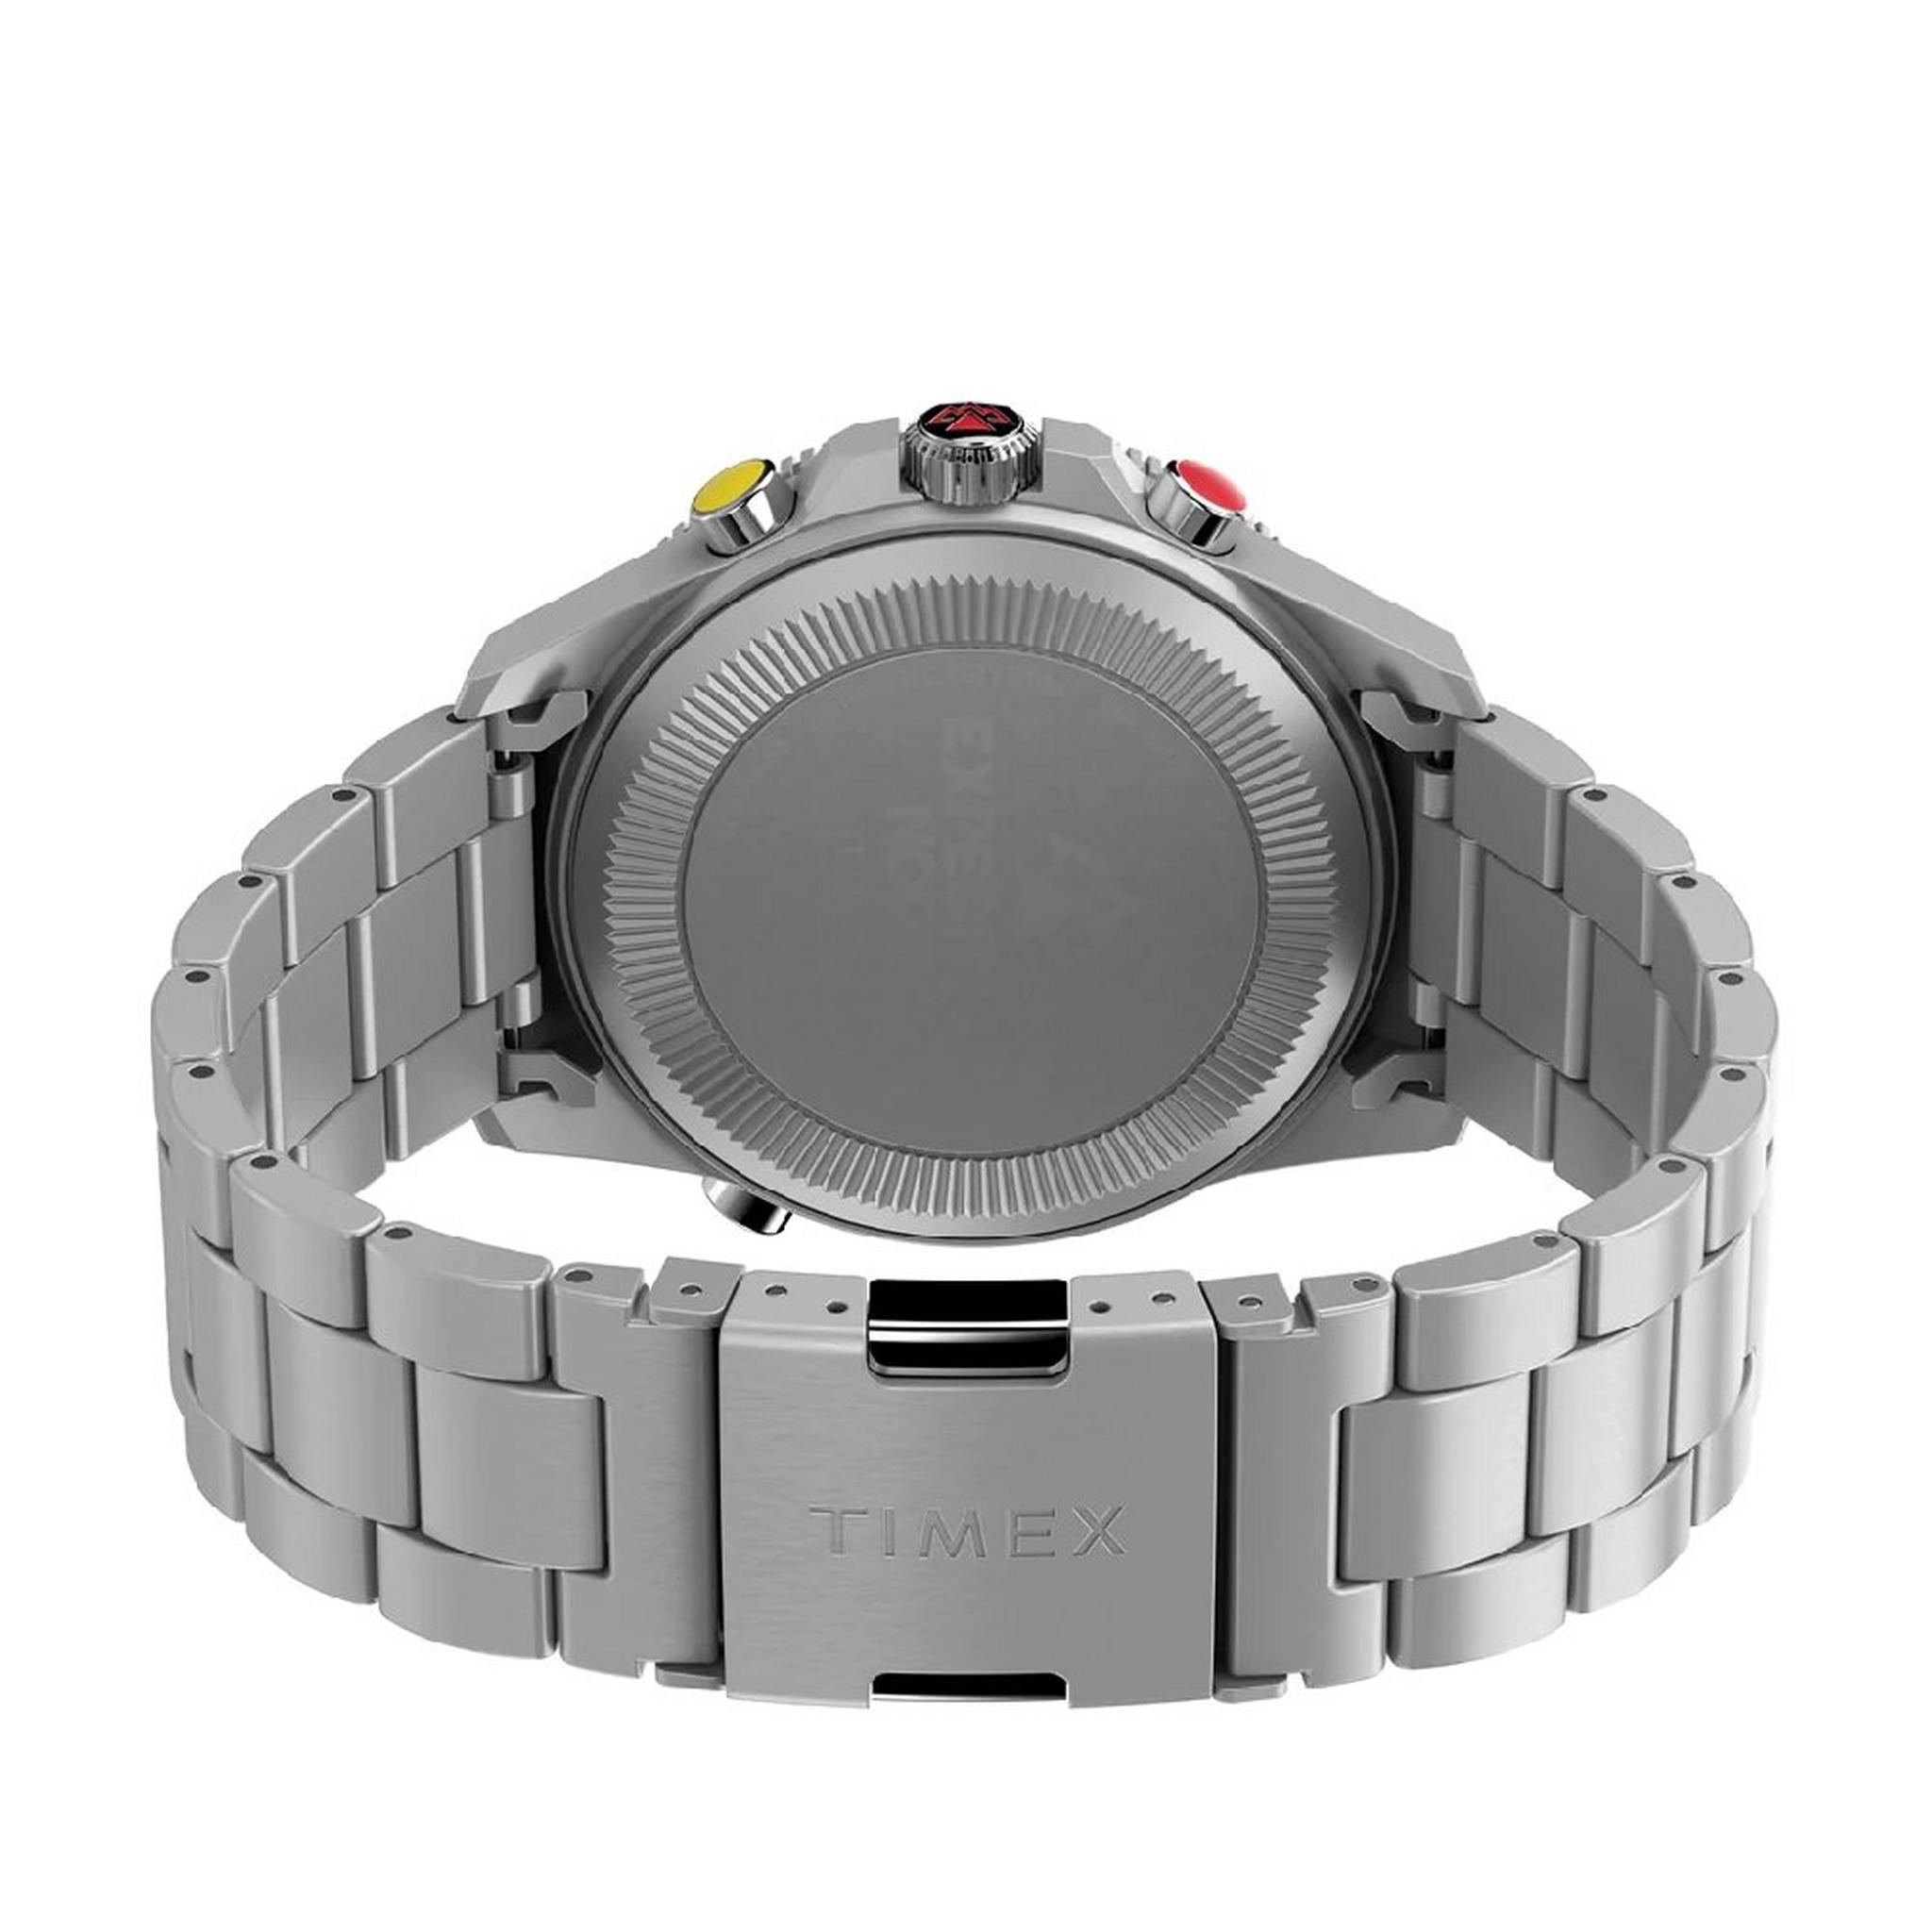 TIMEX Outdoor Watch for Men, Analog, 43mm, Stainless Steel Strap, TW2V41800 - Silver